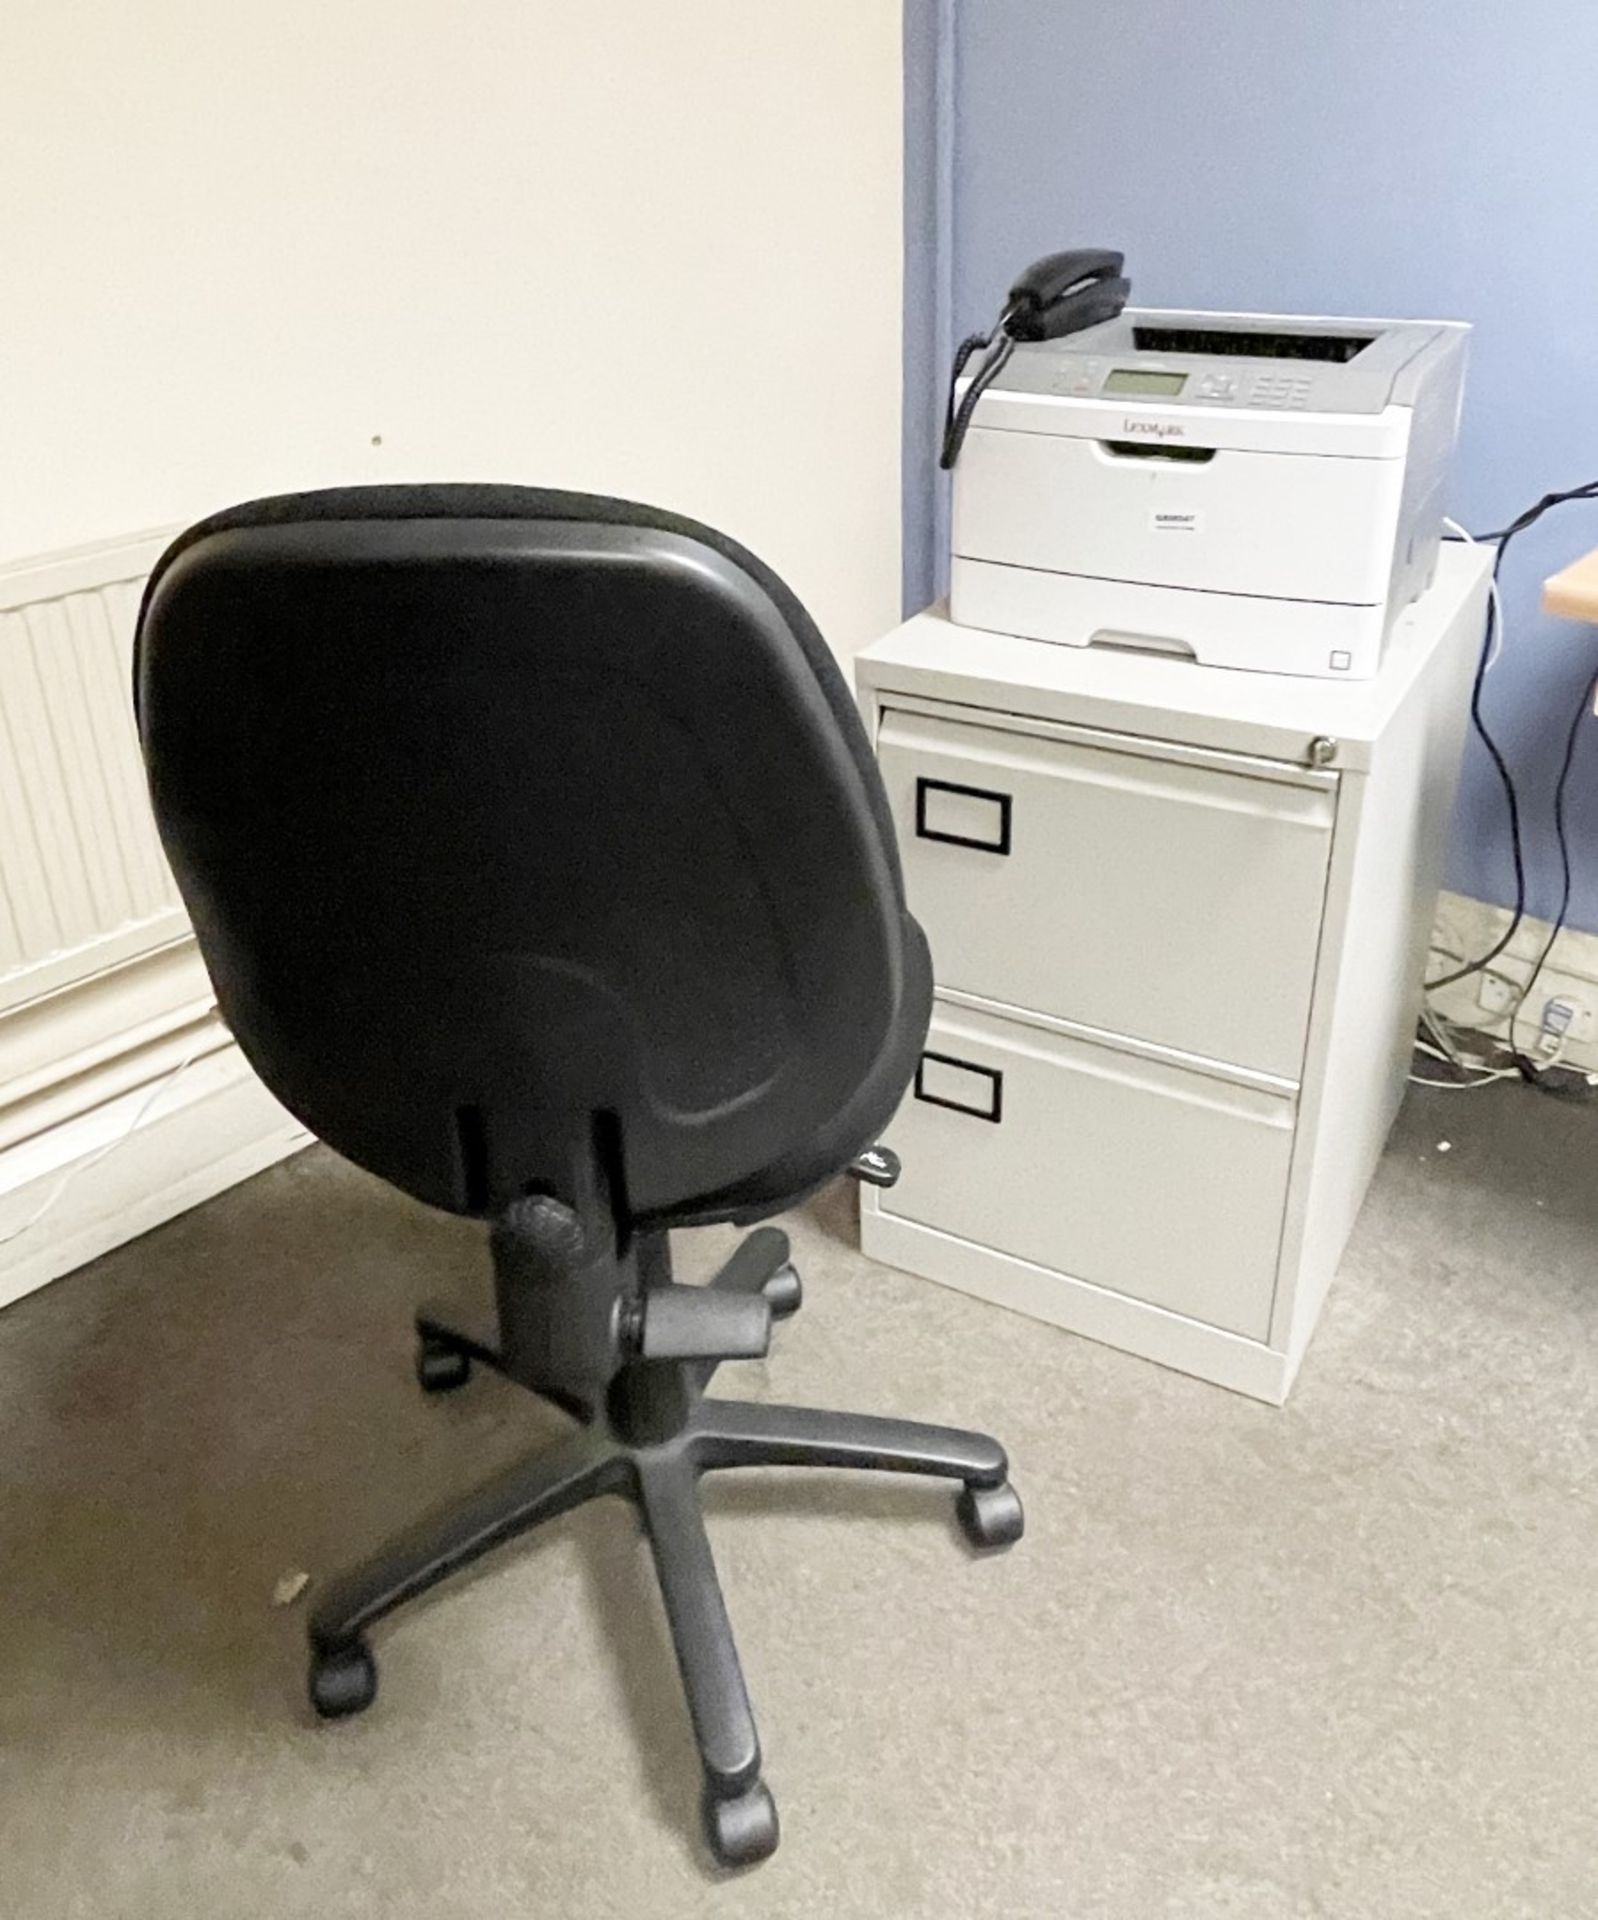 Assorted Collection to Include Lexmark Printer, Desktop PC With Monitor, Filing Cabinet, Desk and